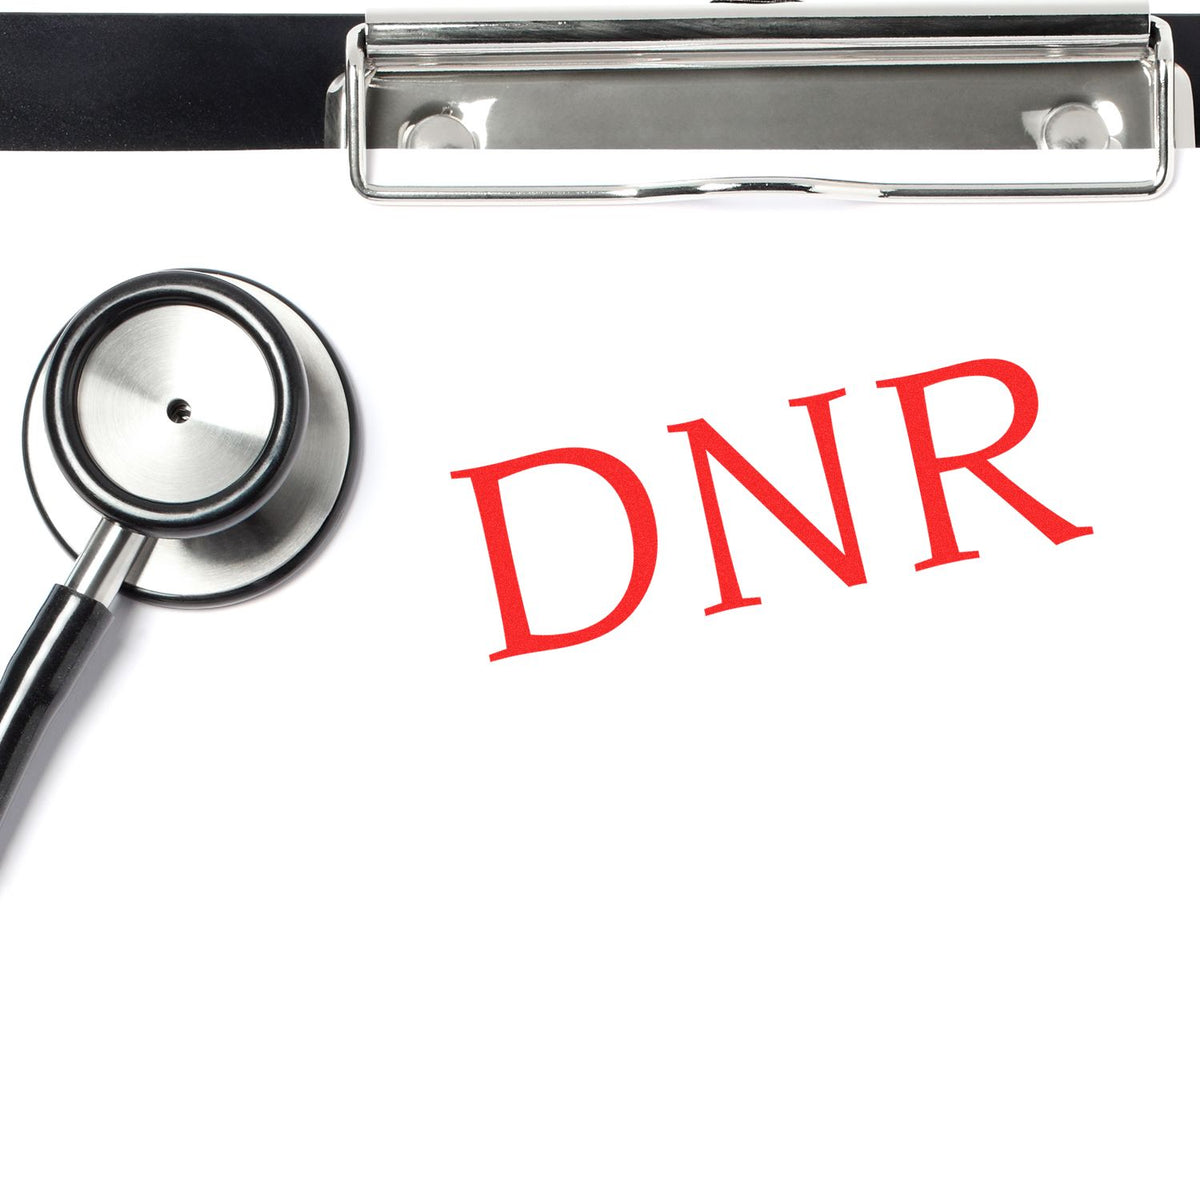 DNR Medical Rubber Stamp In Use Photo